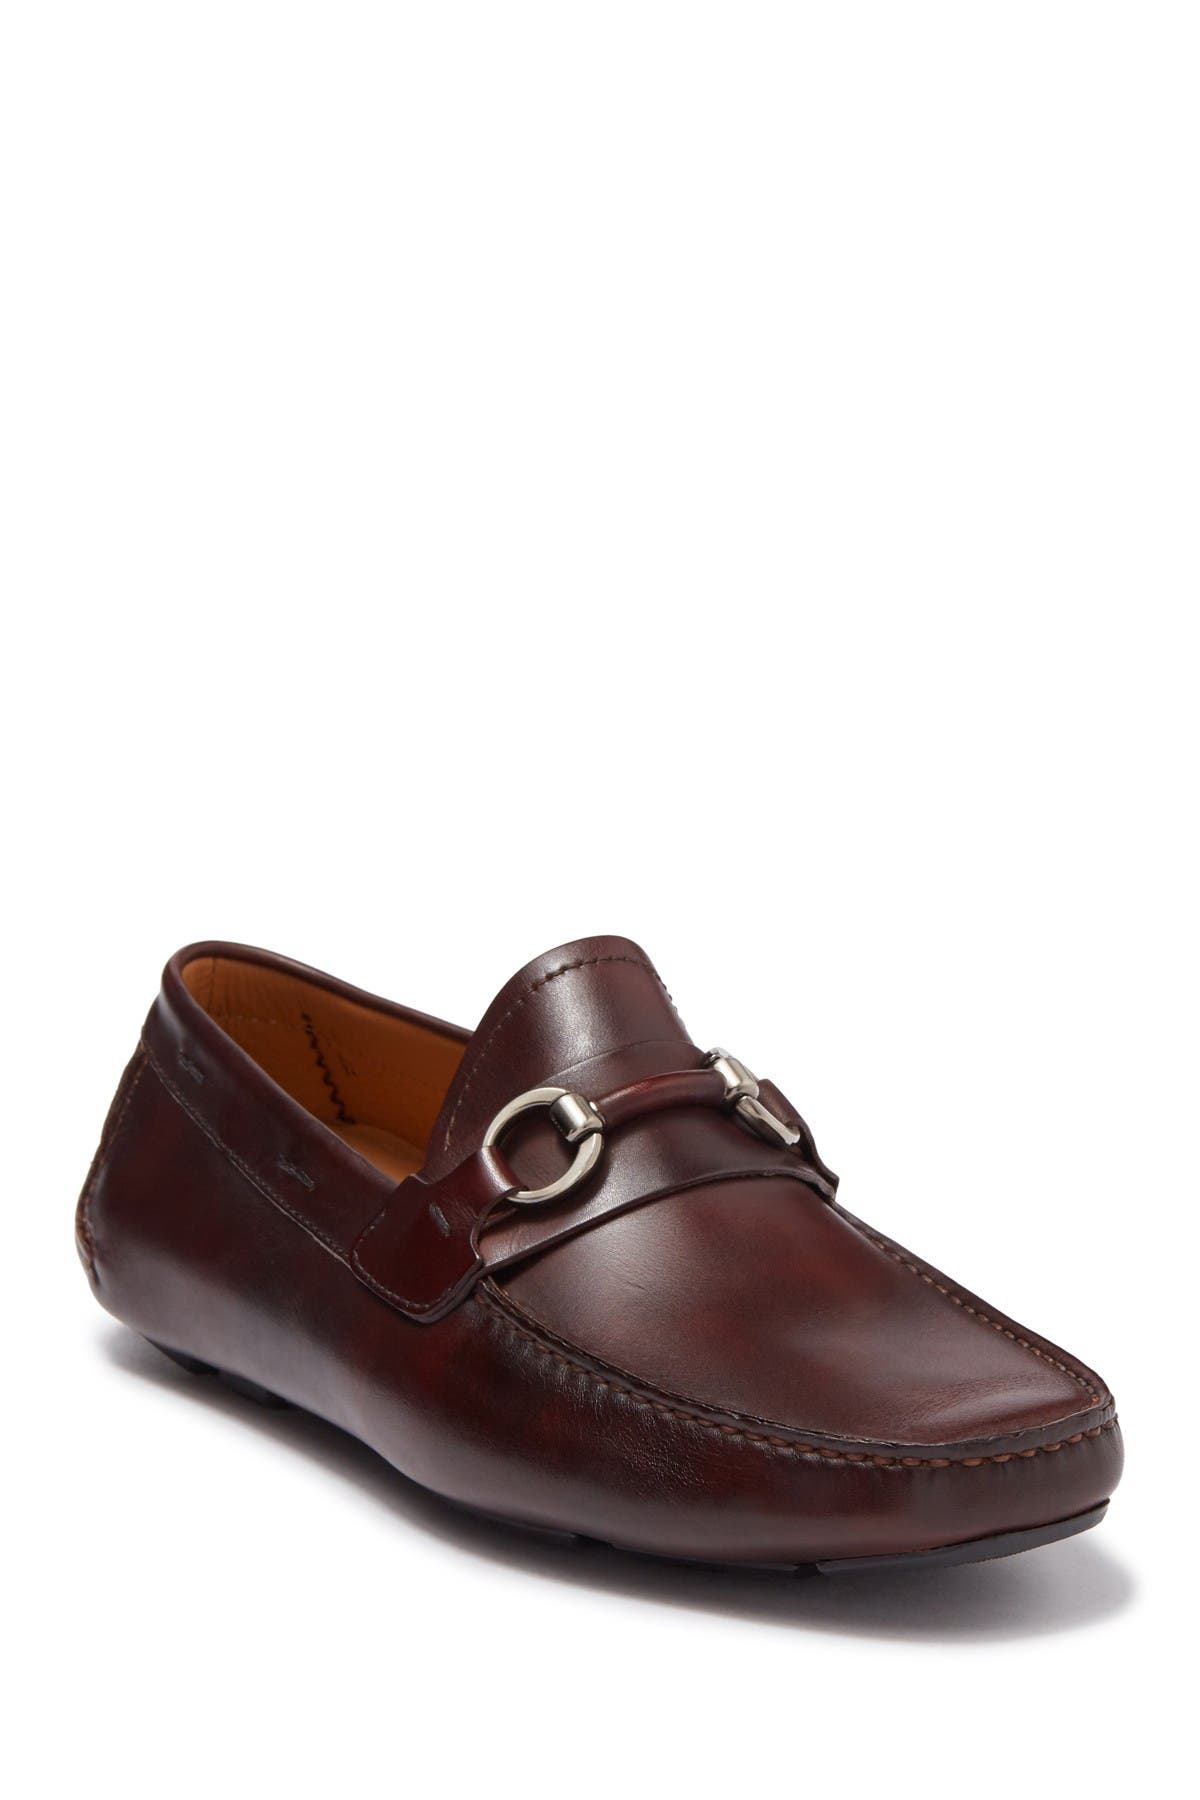 magnanni driving shoes